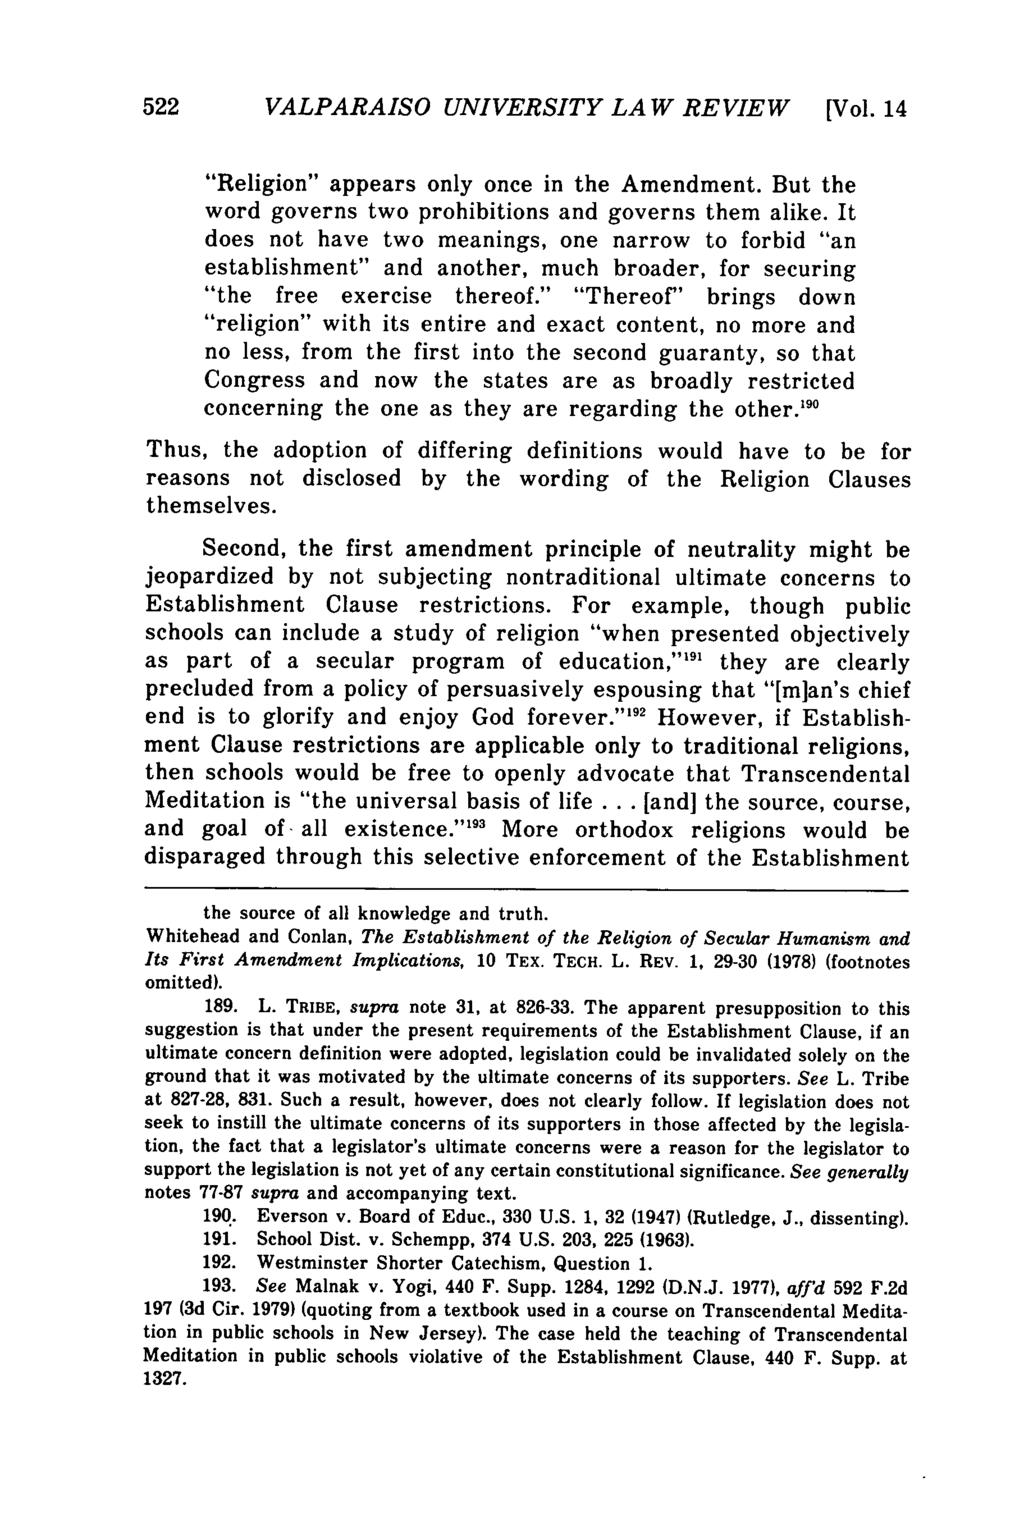 Valparaiso University Law Review, Vol. 14, No. 3 [1980], Art. 4 522 VALPARAISO UNIVERSITY LAW REVIEW [Vol. 14 "Religion" appears only once in the Amendment.